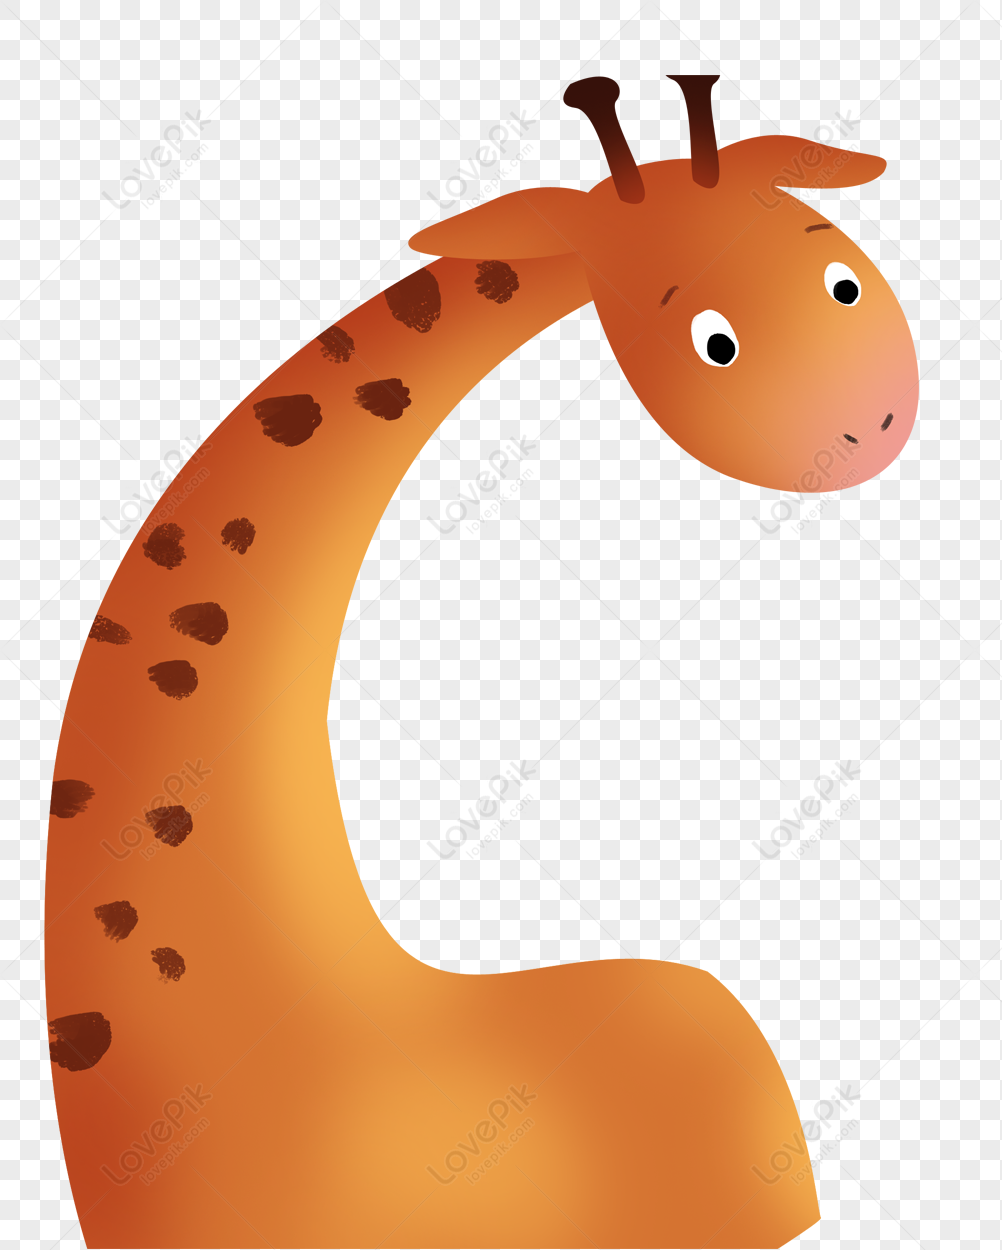 Giraffe PNG Image Free Download And Clipart Image For Free Download -  Lovepik | 400352111